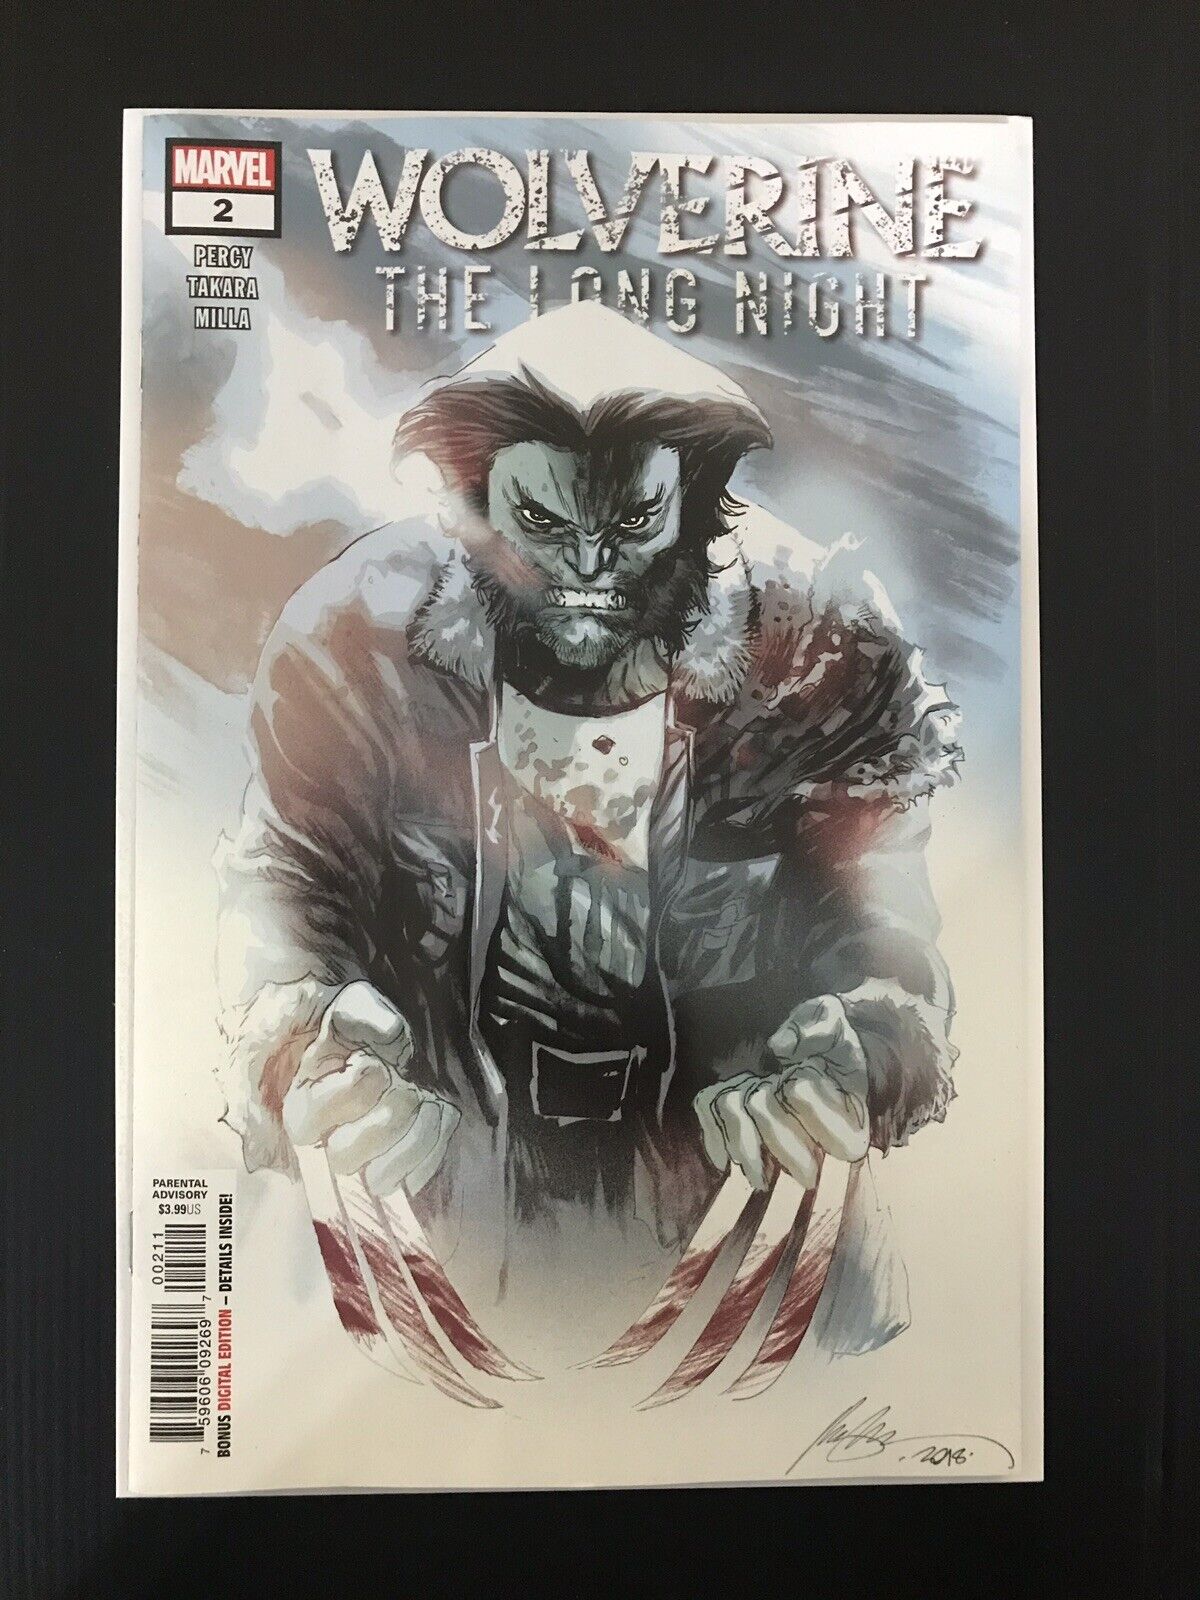 Marvel Comics Wolverine: The Long Night #2 A Cover 2019 CASE FRESH 1st Print NM